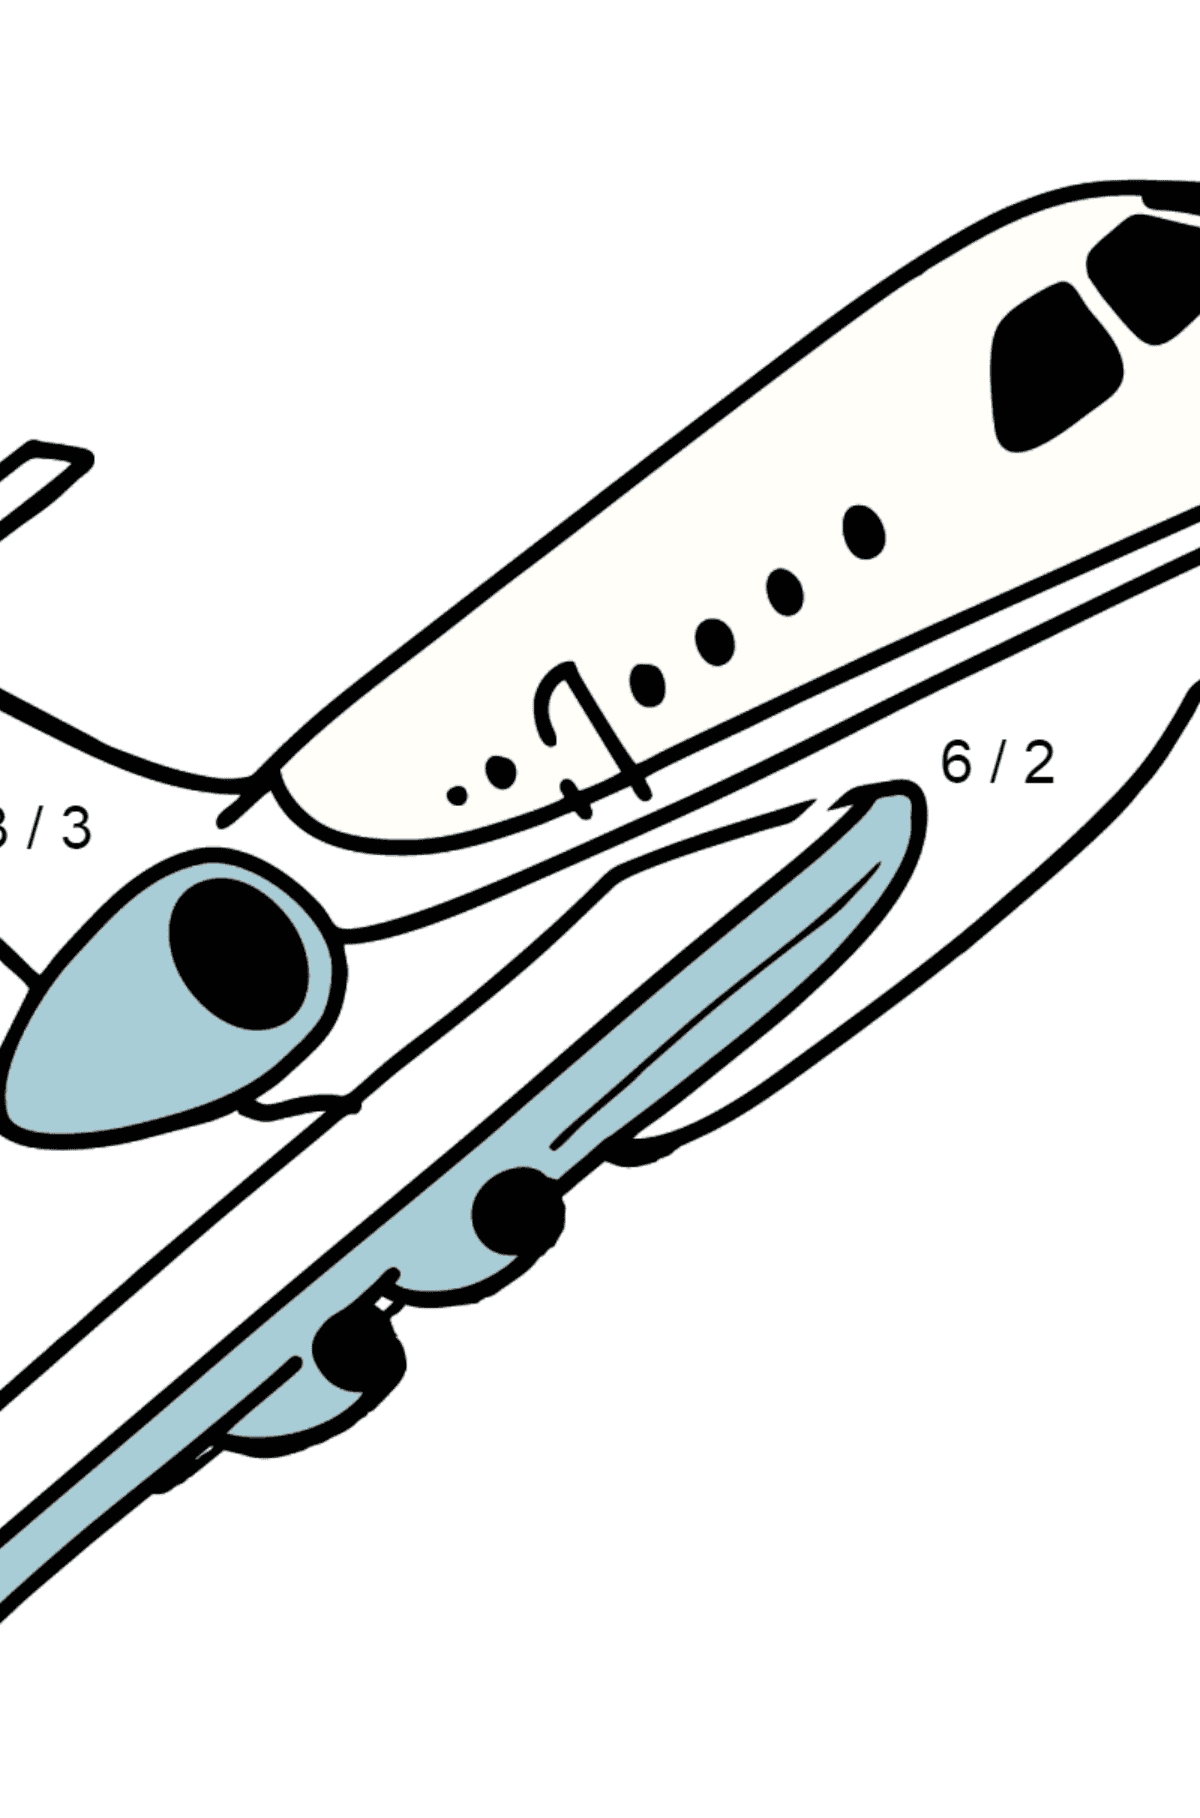 Airbus Airplane coloring page - Math Coloring - Division for Kids